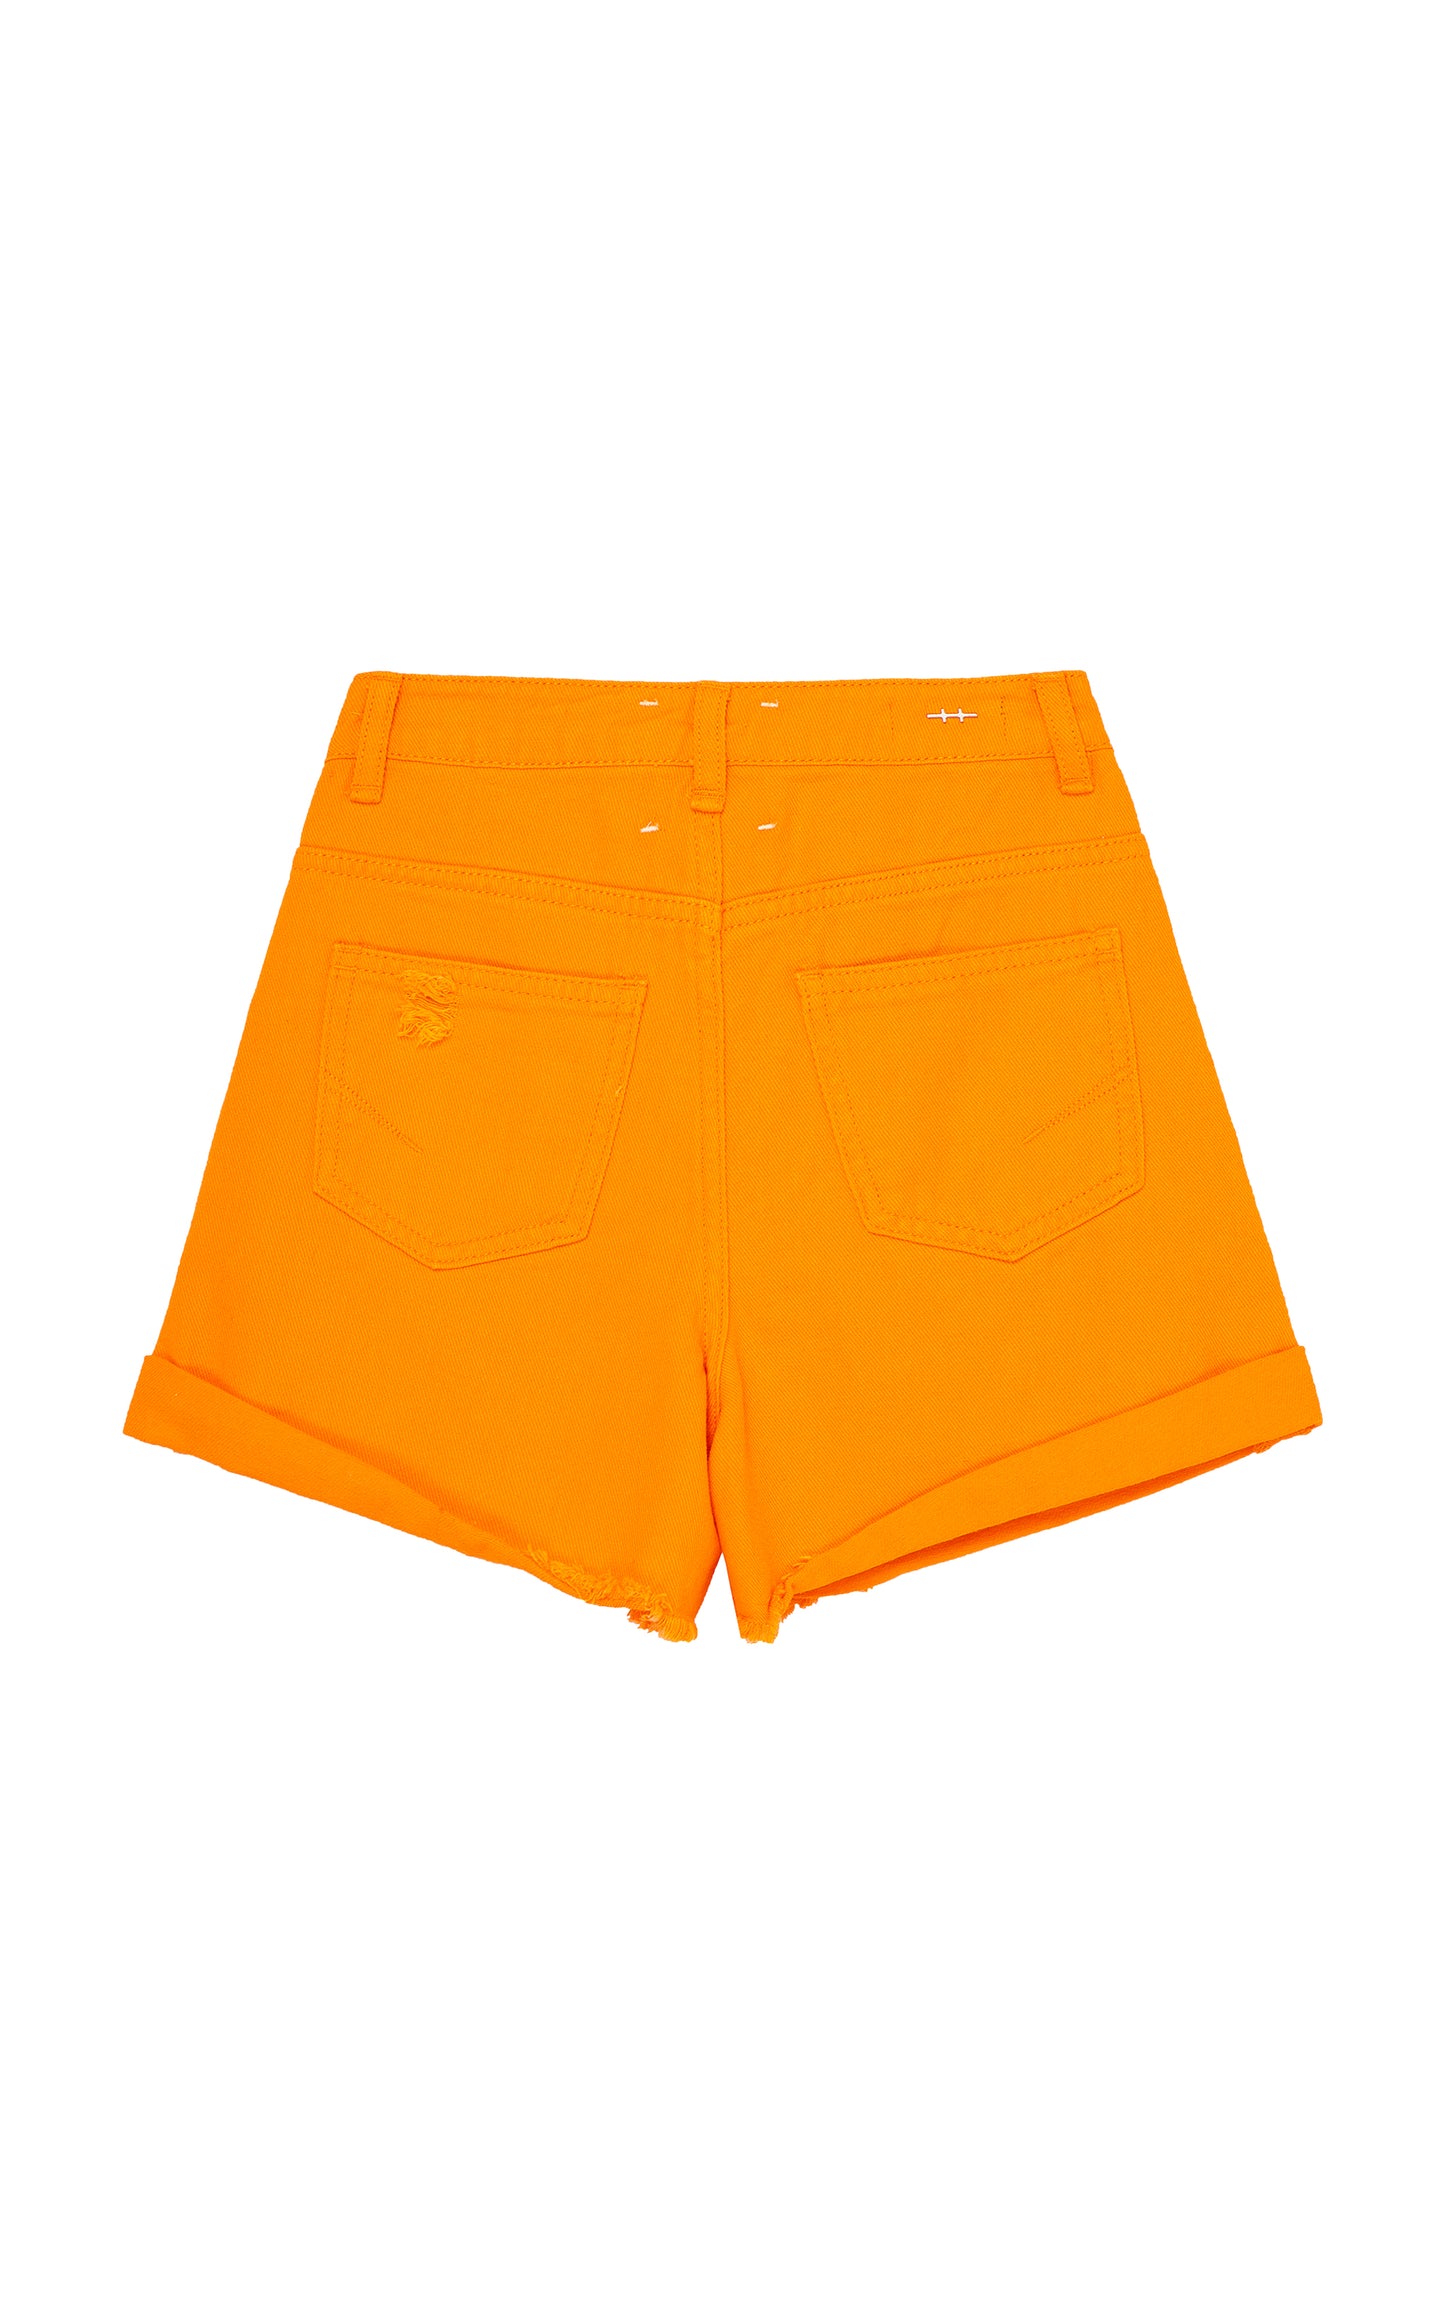 BACK OF BRIGHT ORANGE DENIM CUT OFF SHORTS WITH ROLLED HEM AND SLIGHT DISTRESSING